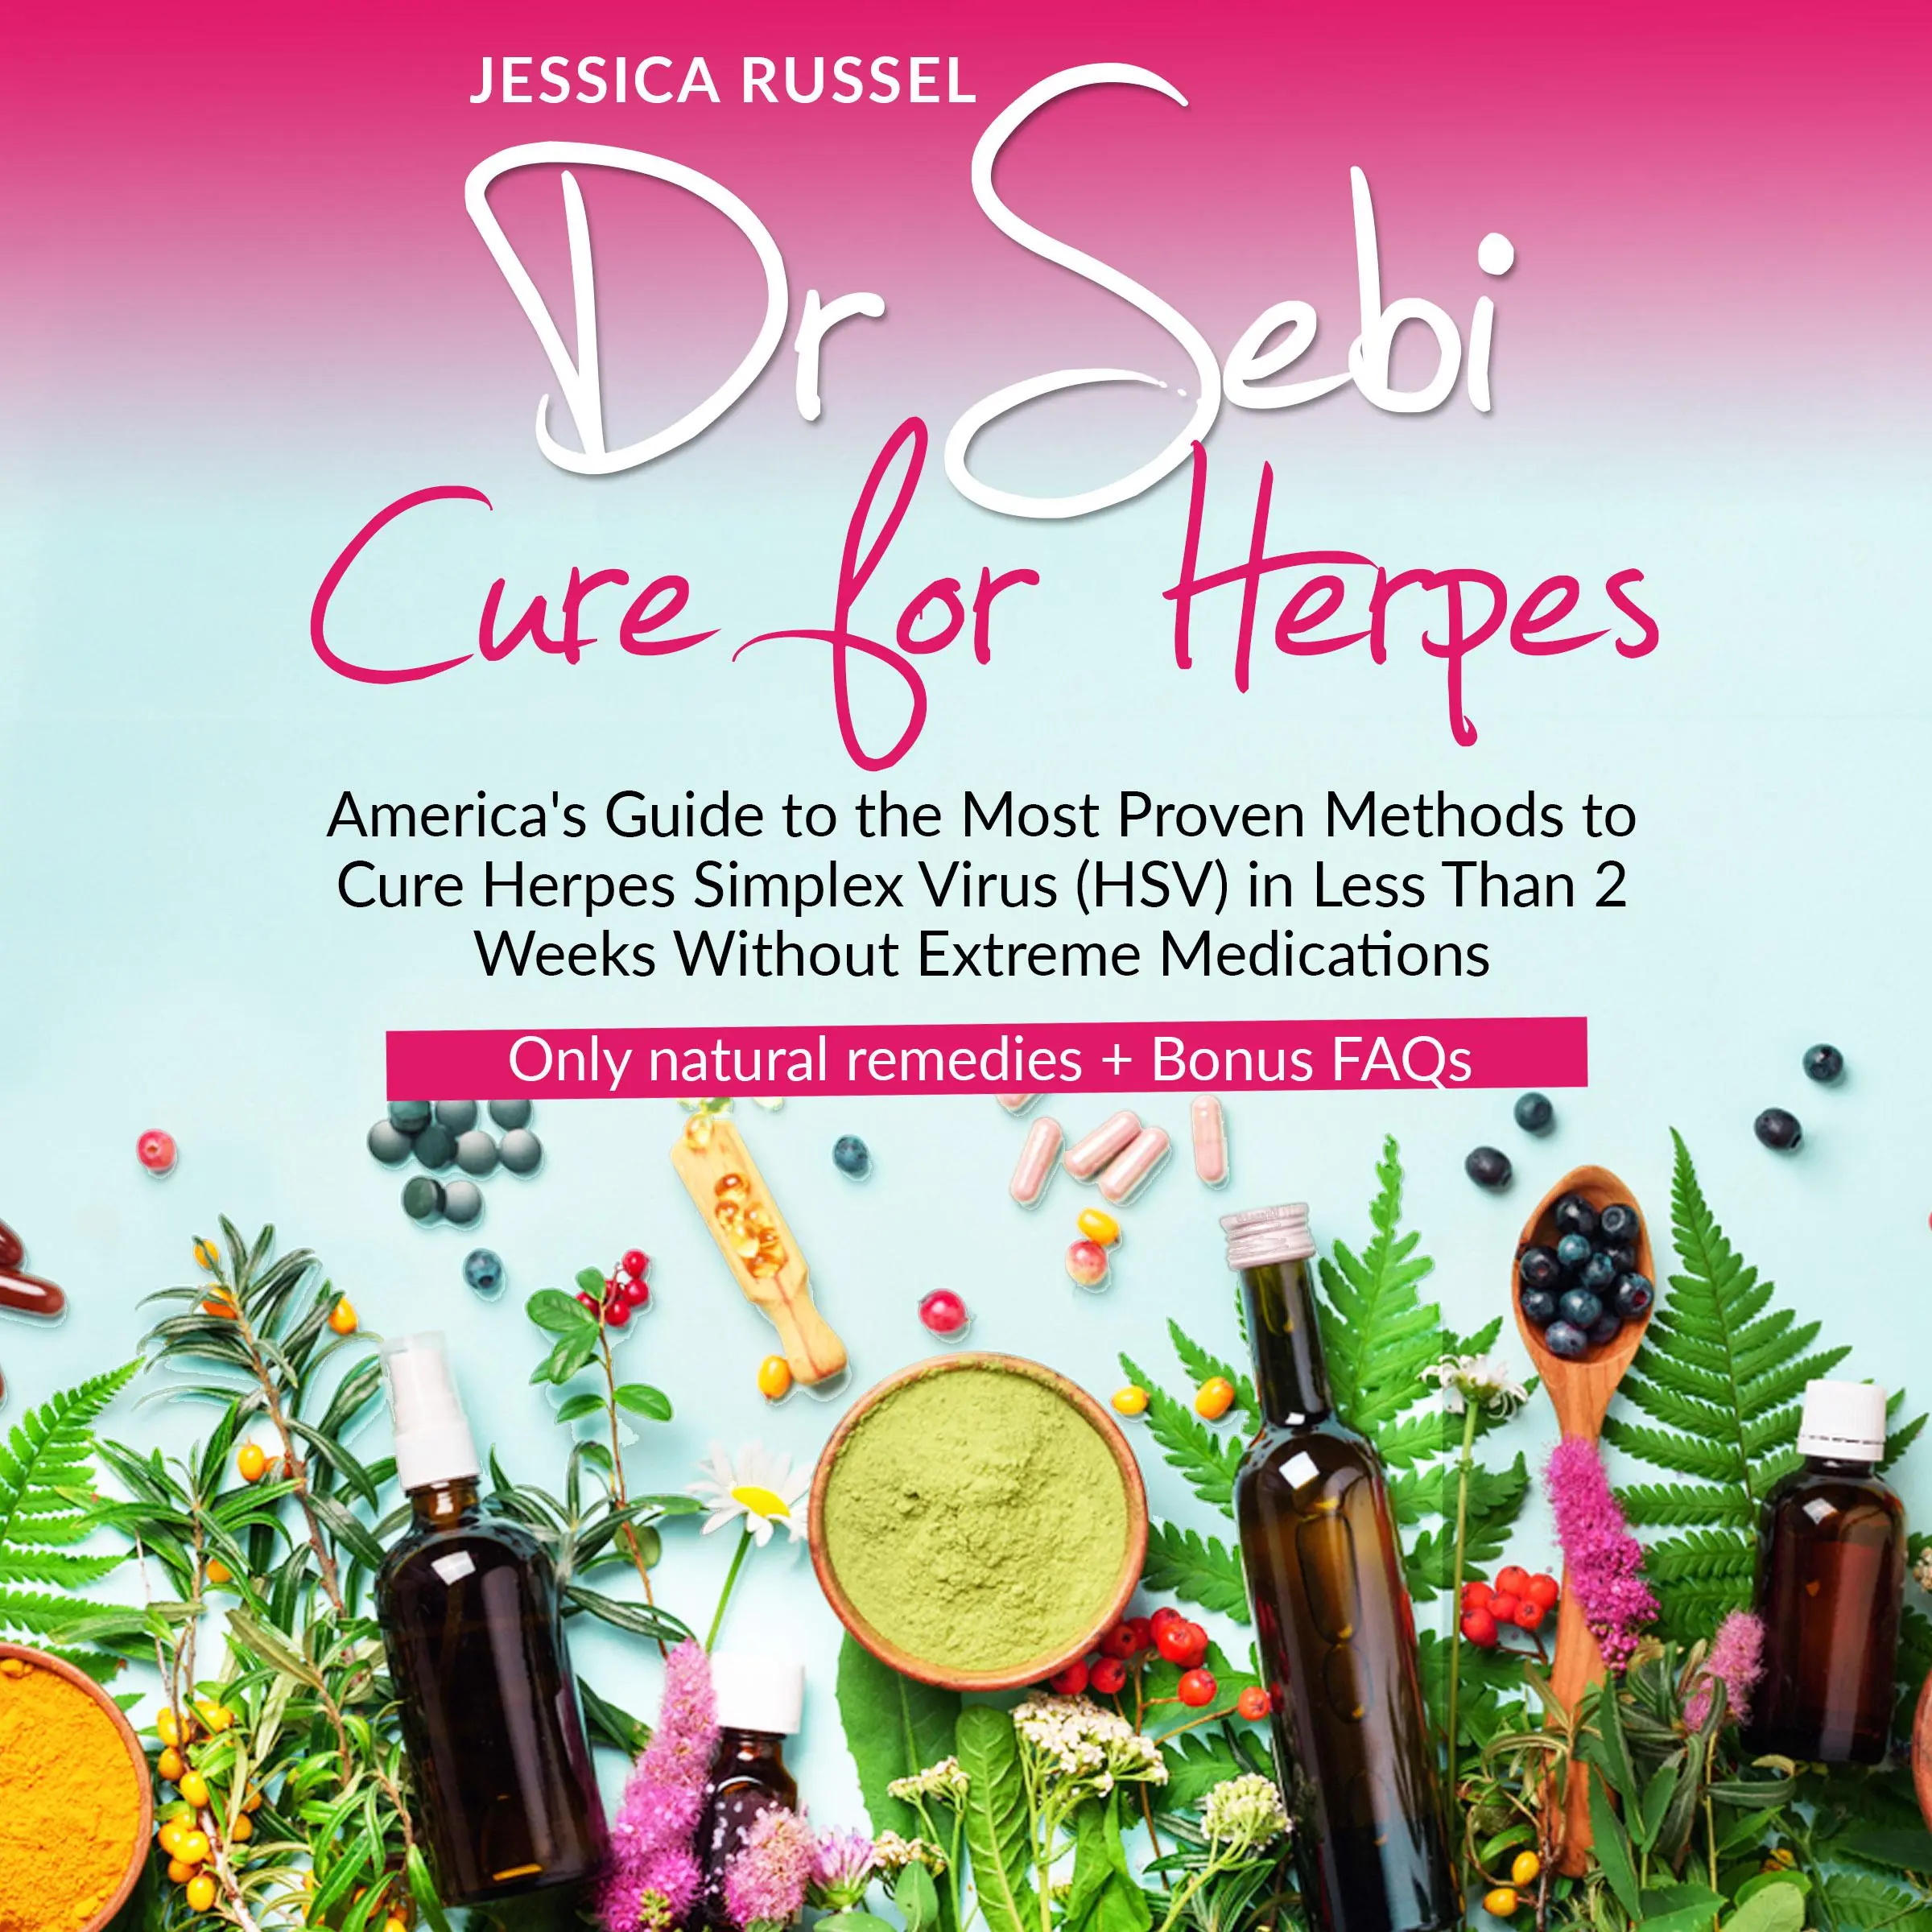 Dr Sebi Cure for Herpes Audiobook by Jessica Russel